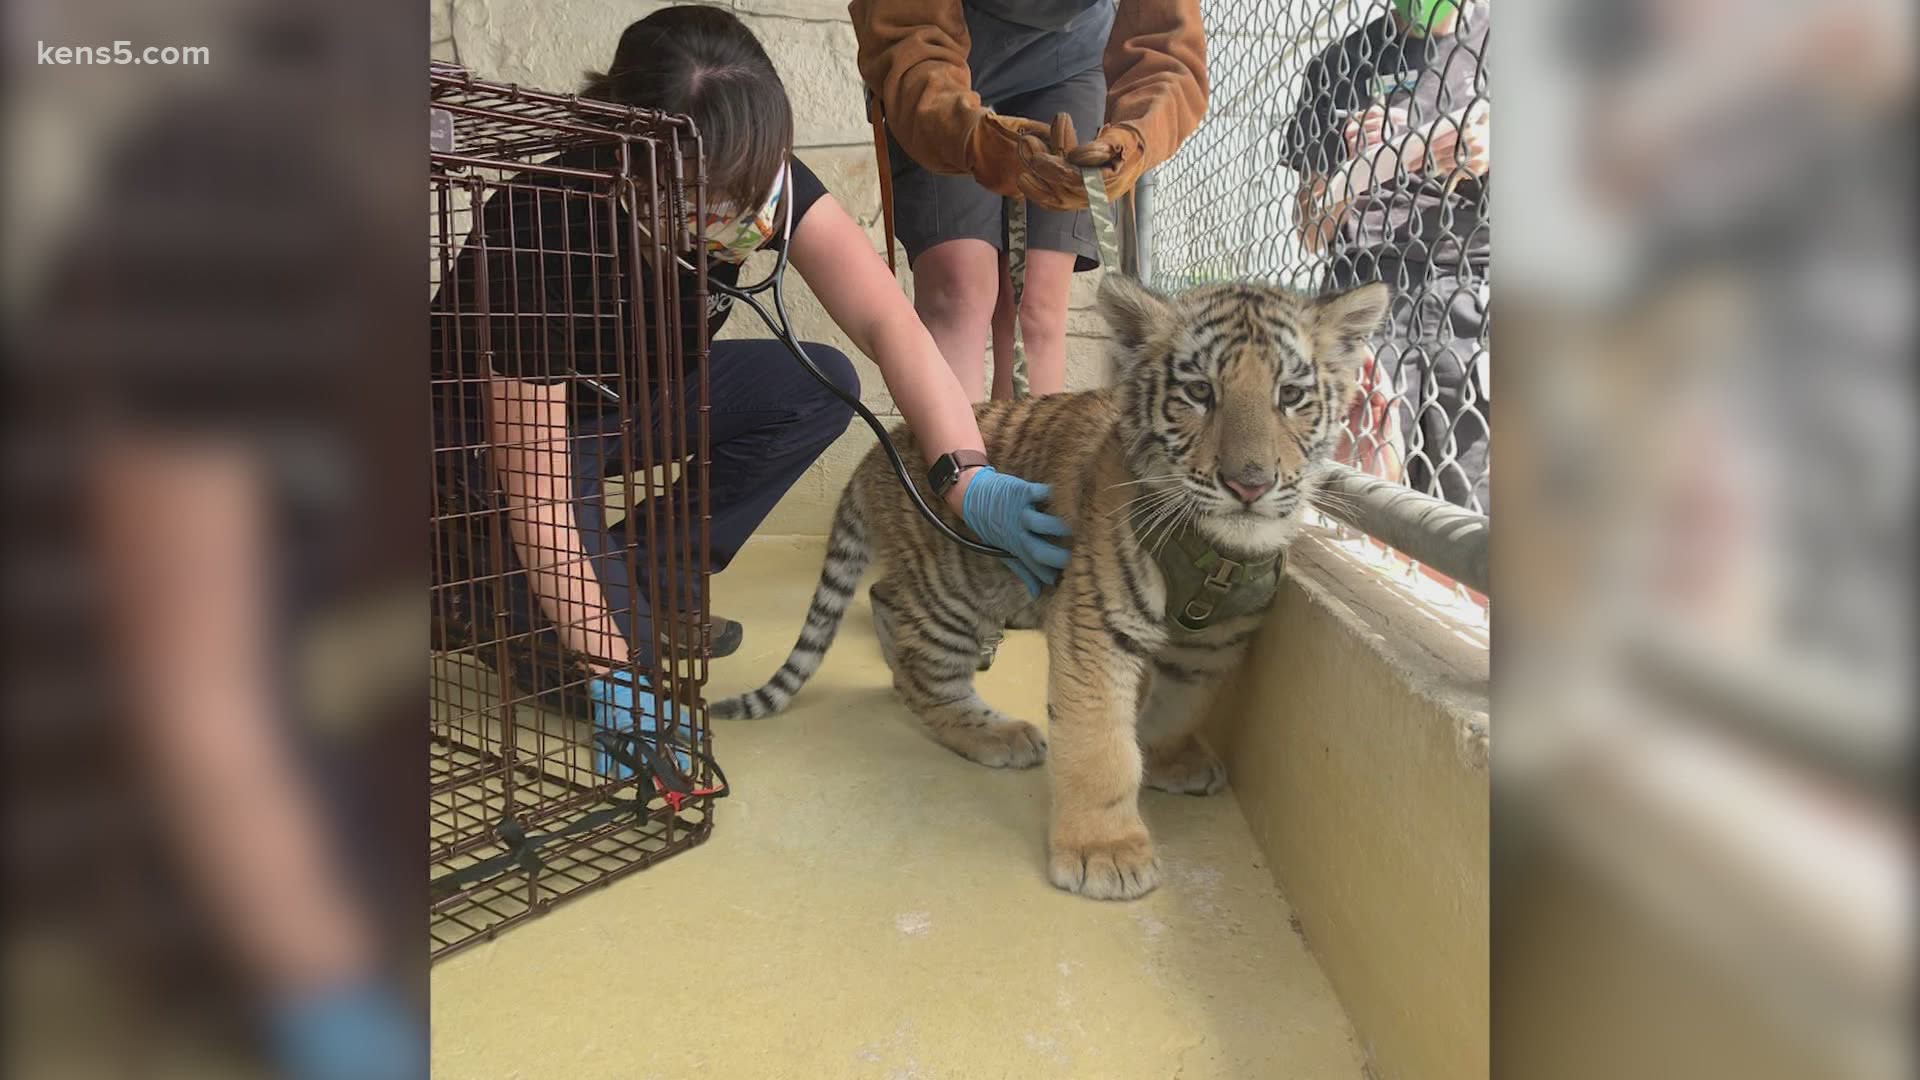 A malnourished tiger cub and bobcat were seized from a home where they were being kept as pets, and the zoo is helping to care for them and find them new homes.